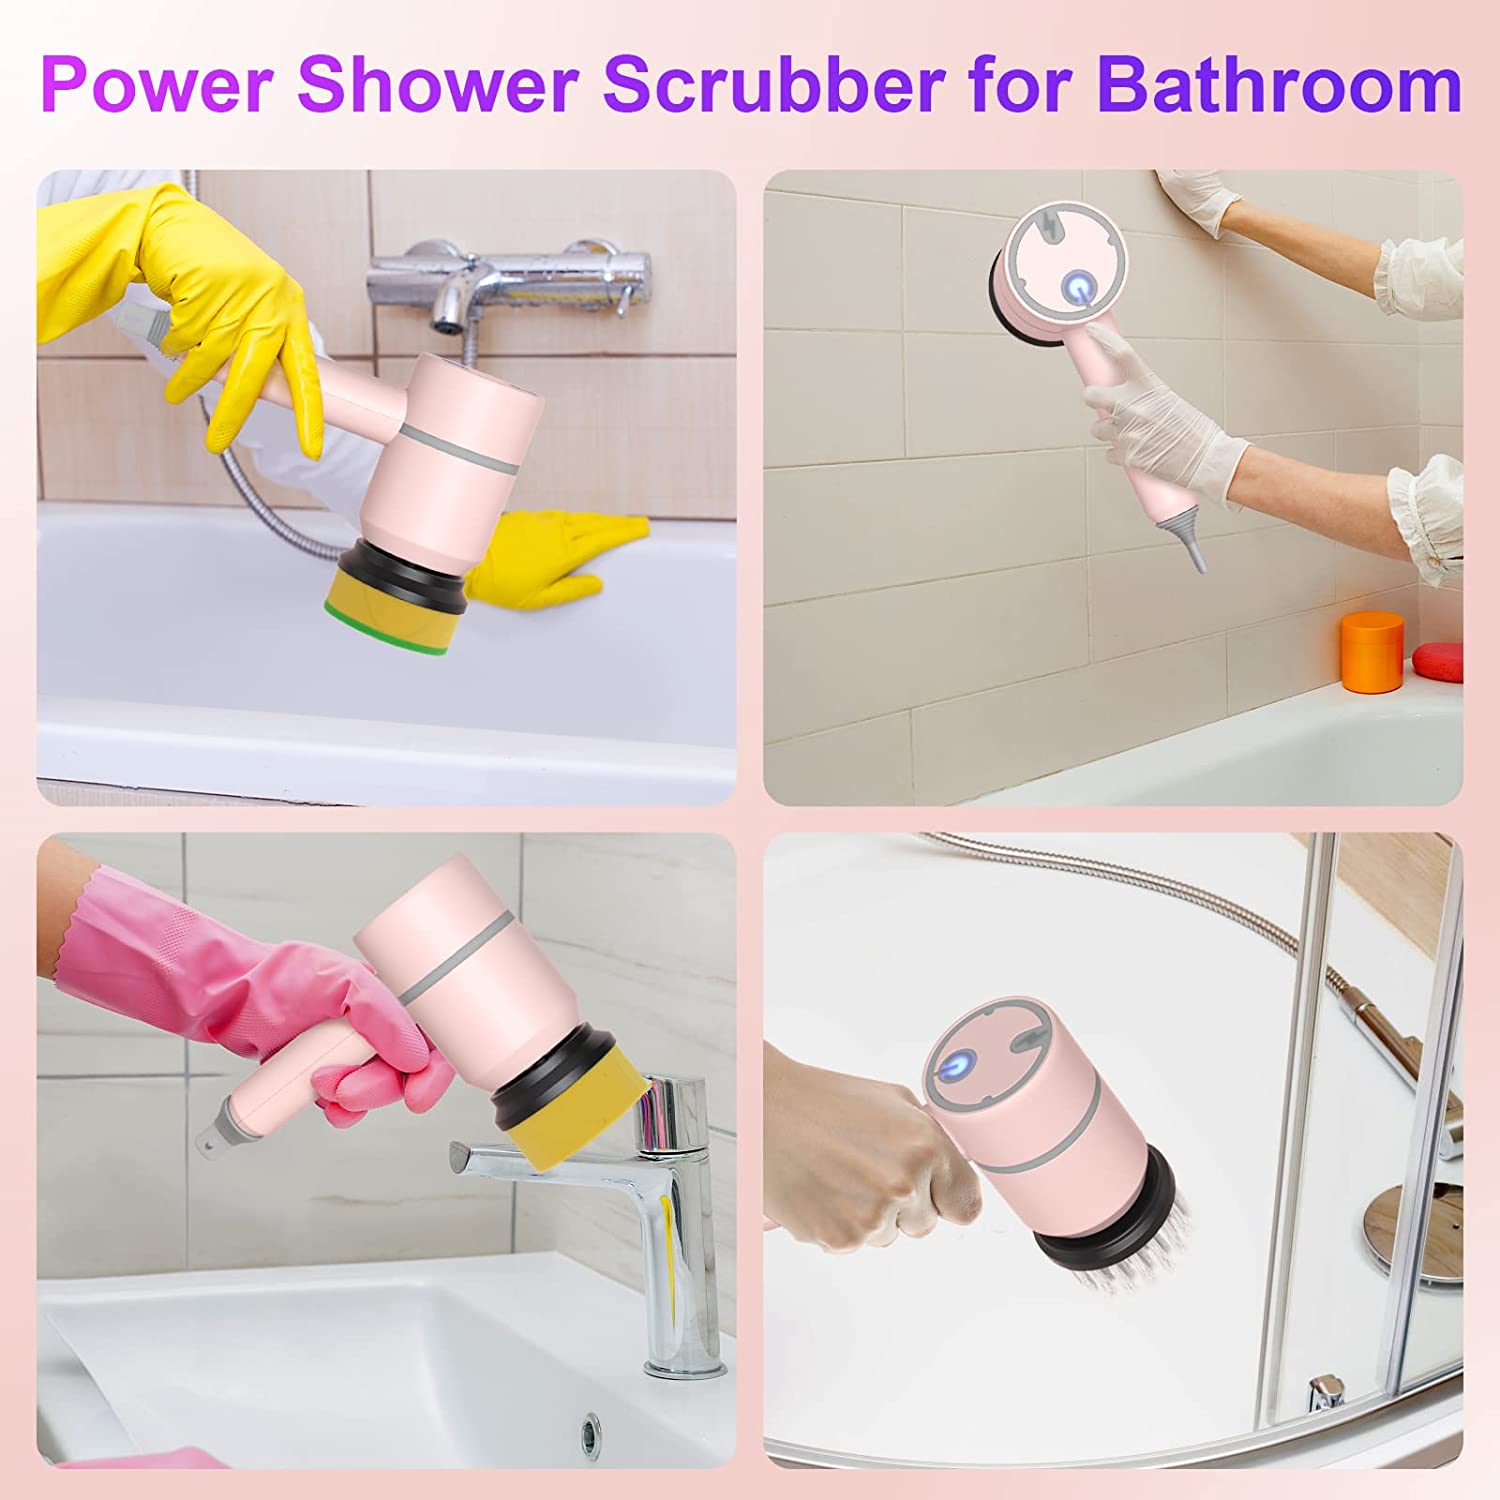 Electric-Spin-Scrubber-Rechargeable-Cleaning-Brush-with-3-Brush-Heads-Portable-Scrubber-Kit-Suitable-for-Bathroom-Wall-Tiles-Floor-Window-Kitchen-22